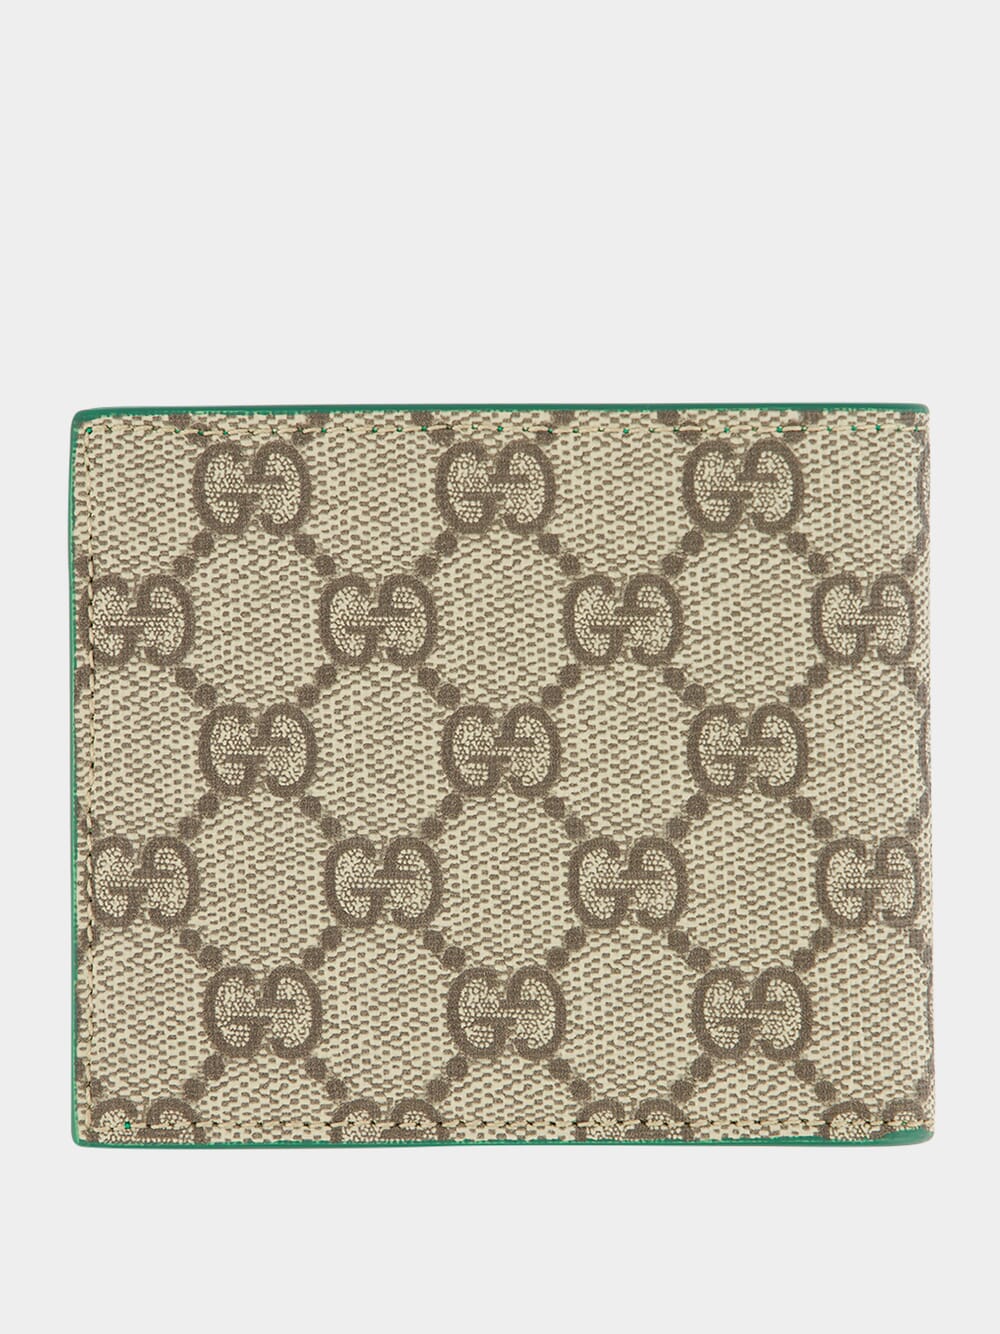 GucciGG Detail Green Leather Trim Wallet at Fashion Clinic